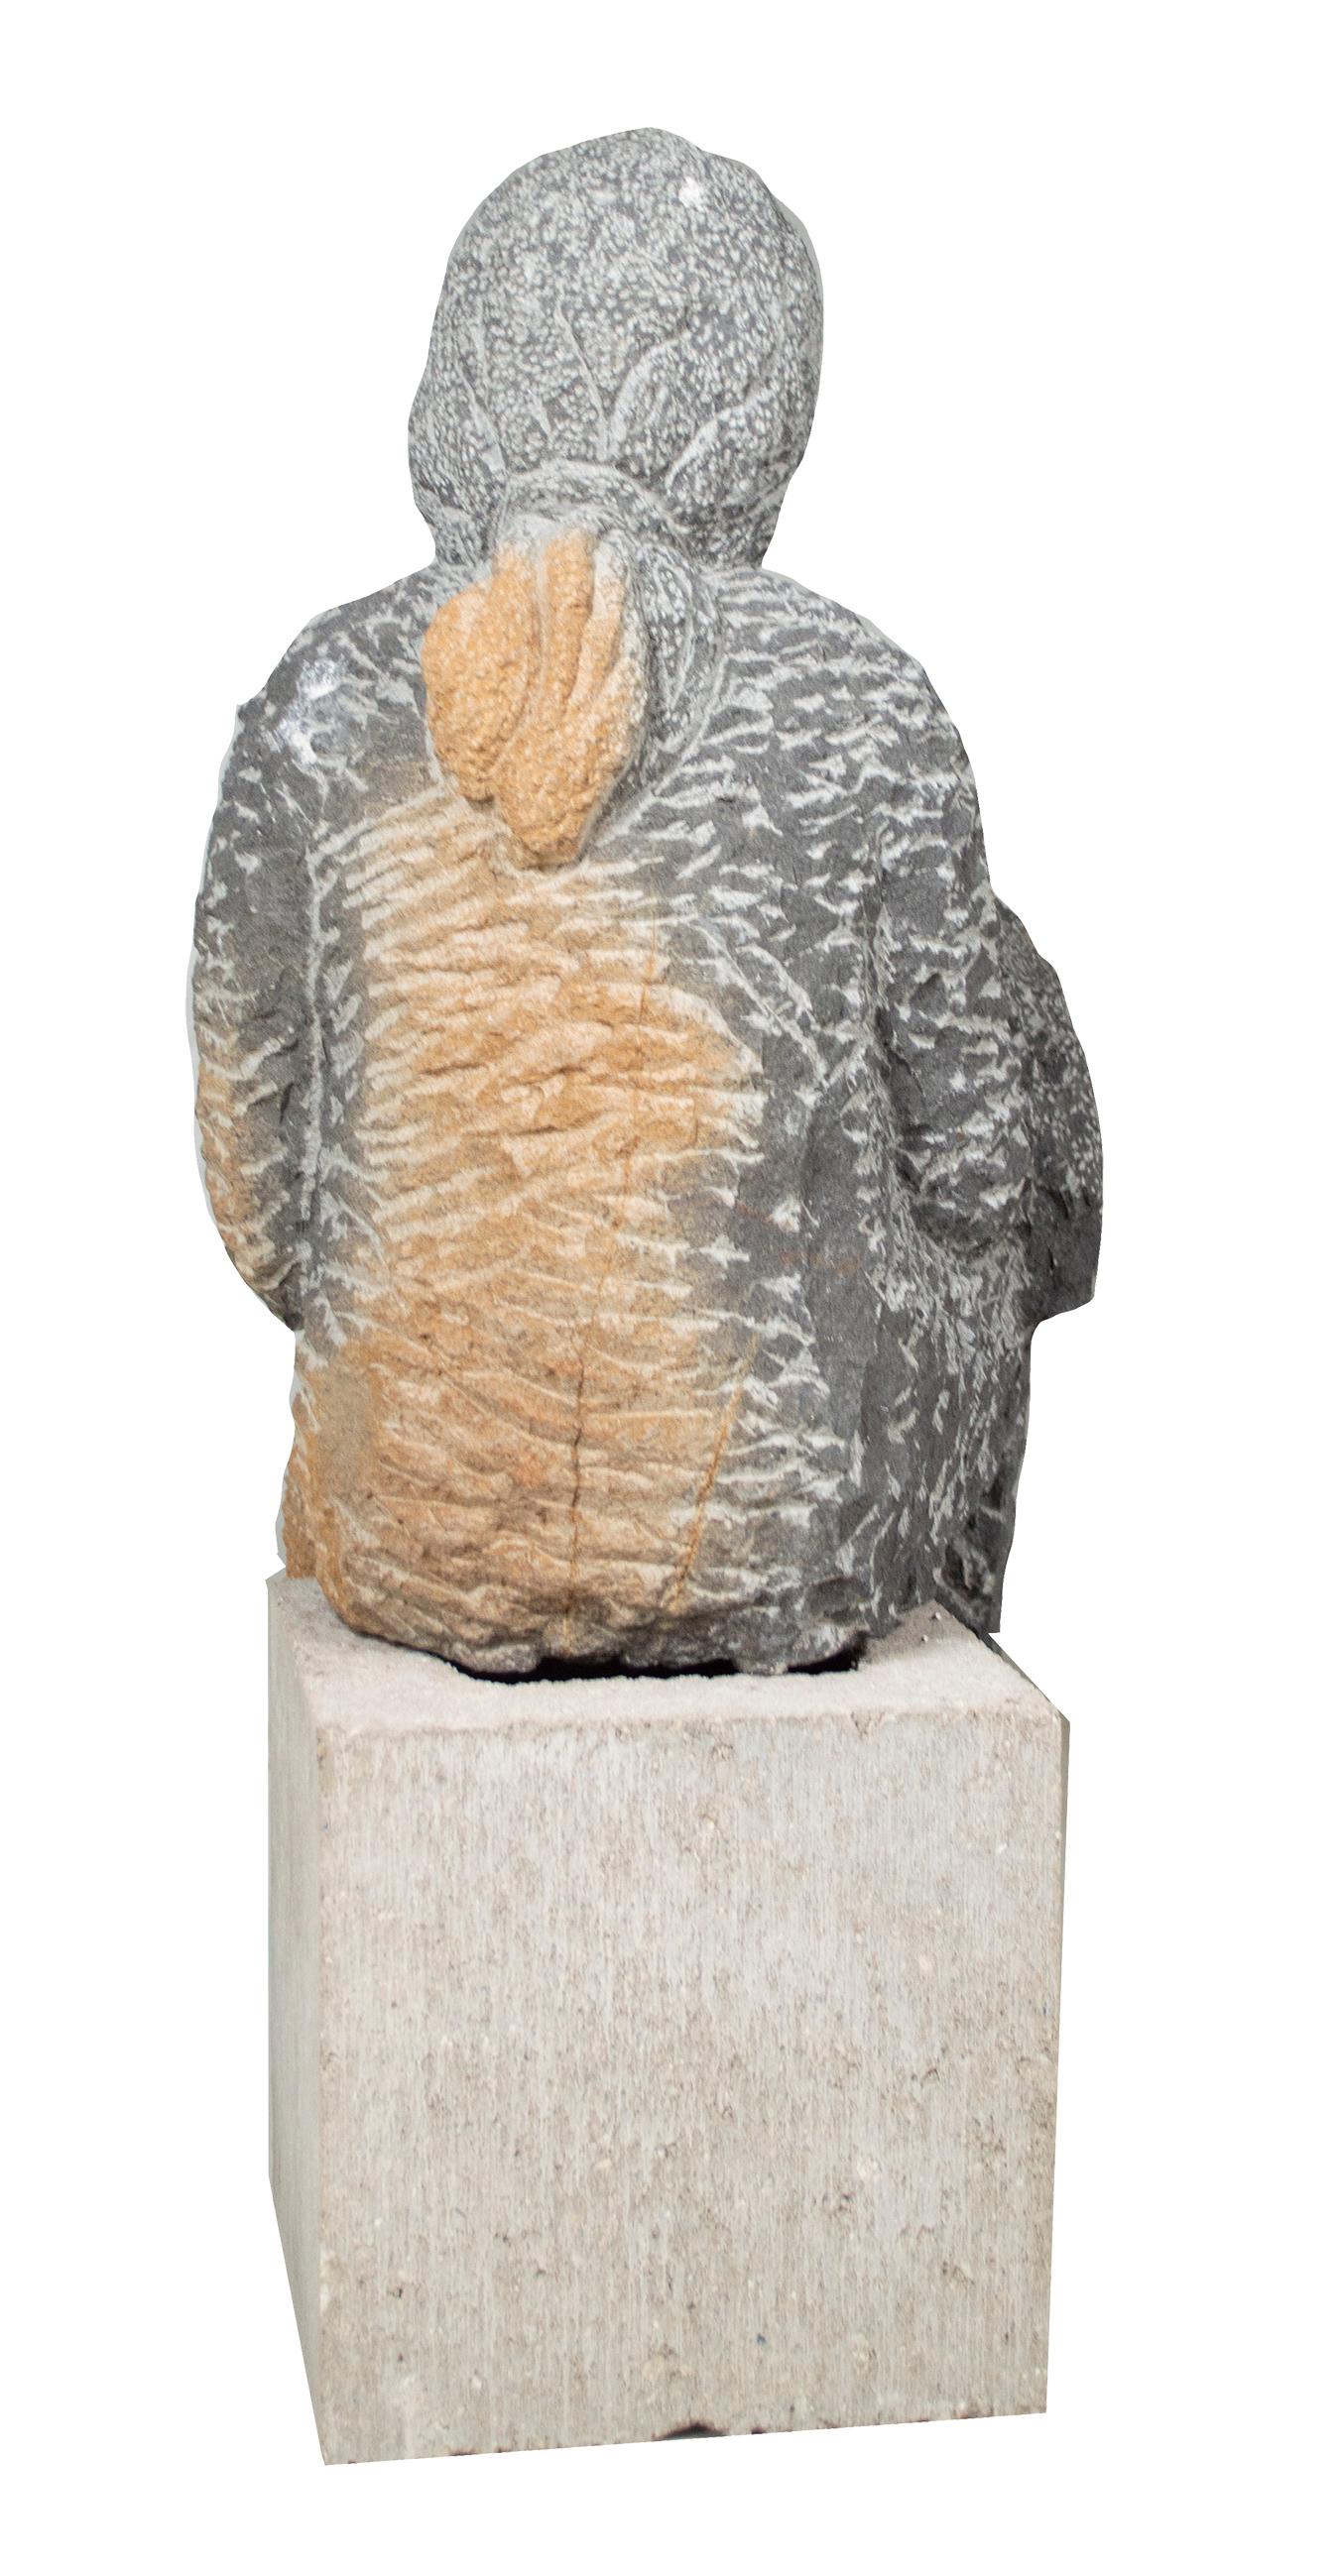 'Mother and Child' is an original stone sculpture by the Zimbabwean artist Obert Mukumbi. This sculpture is unlike most other examples of Shona sculpture in that it has been carved to sit on a step, ledge or shelf rather than to stand upright. While